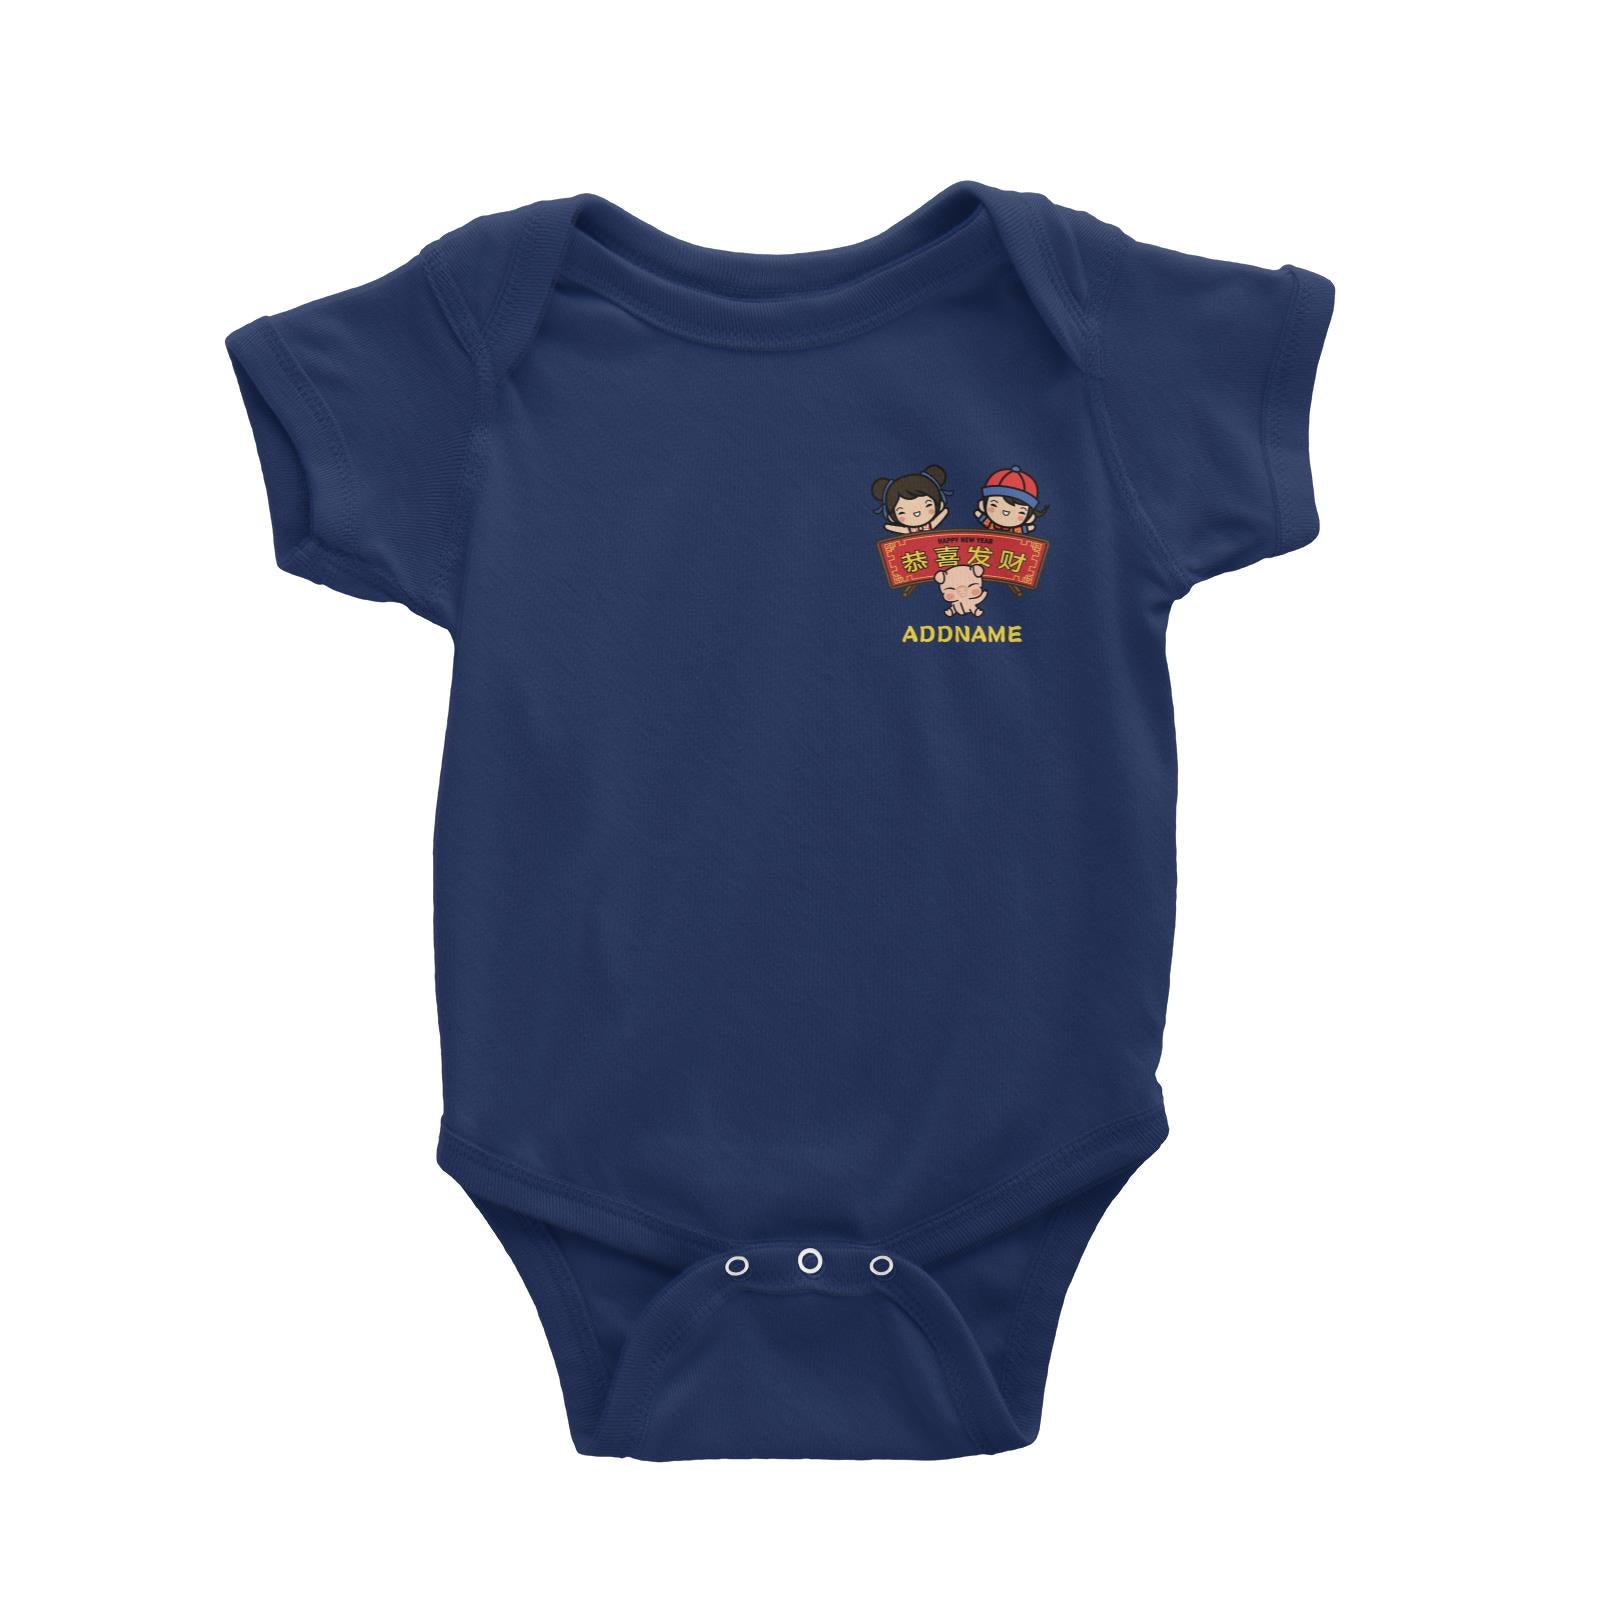 Prosperity Pig Boy, Girl And Baby Pig with Signage Pocket Design Baby Romper